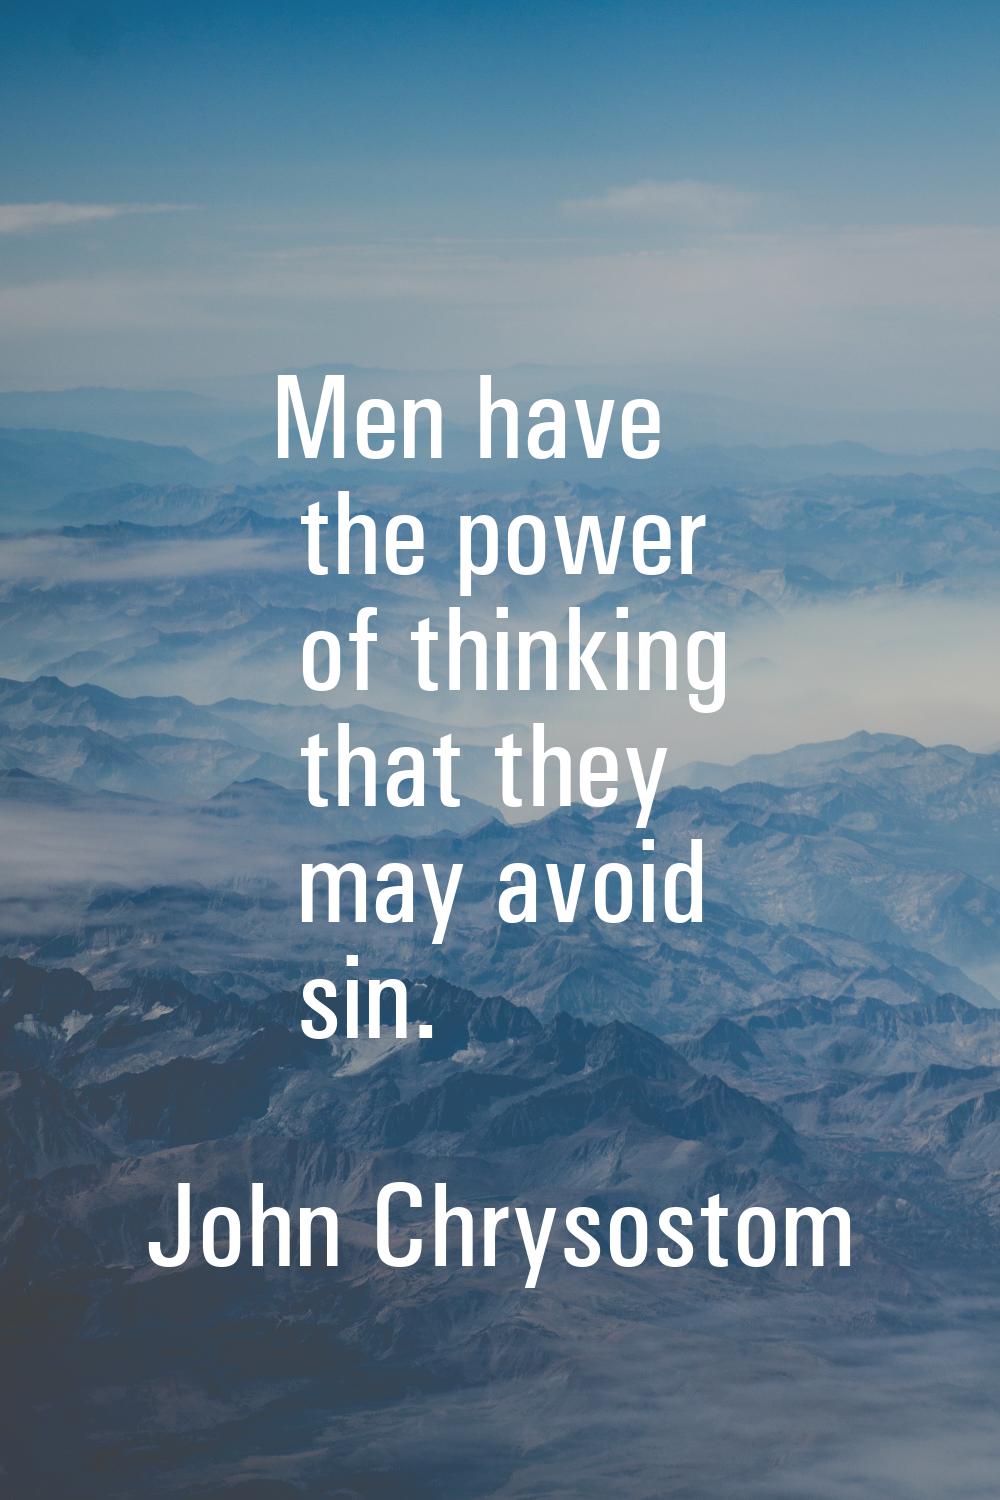 Men have the power of thinking that they may avoid sin.